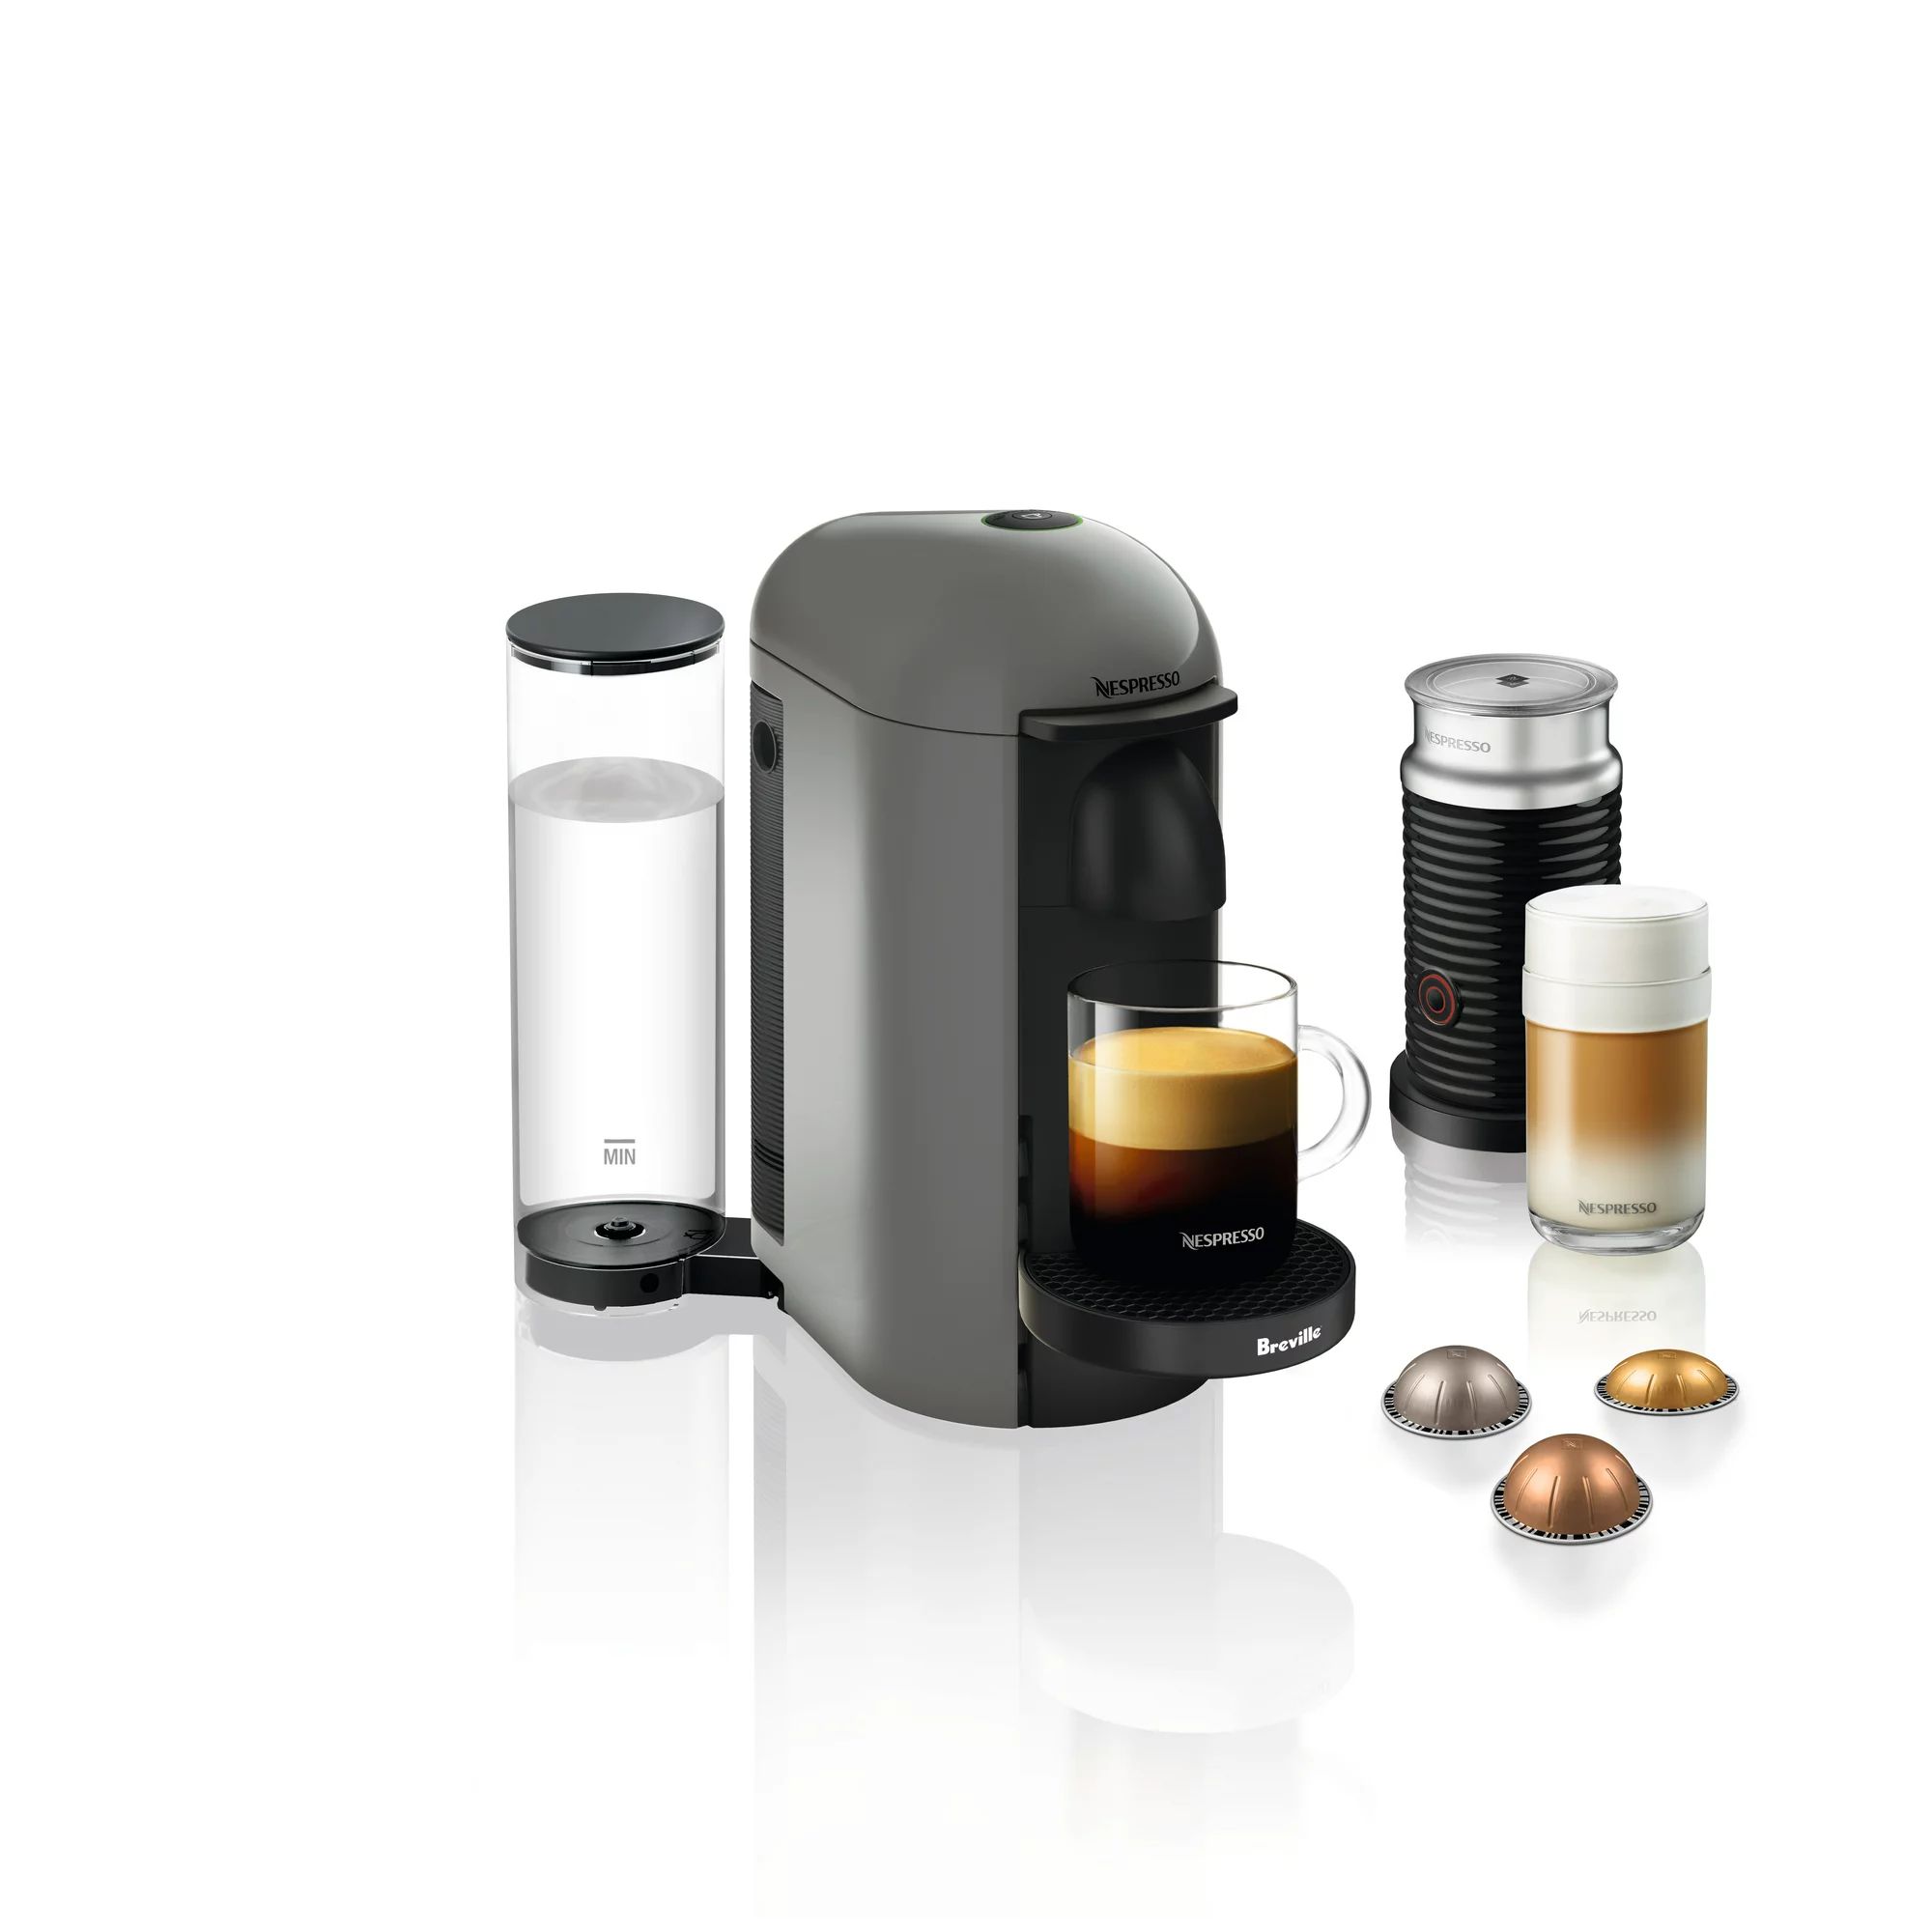 Nespresso VertuoPlus Coffee and Espresso Maker by Breville with Aeroccino Milk Frother, Grey | Walmart (US)